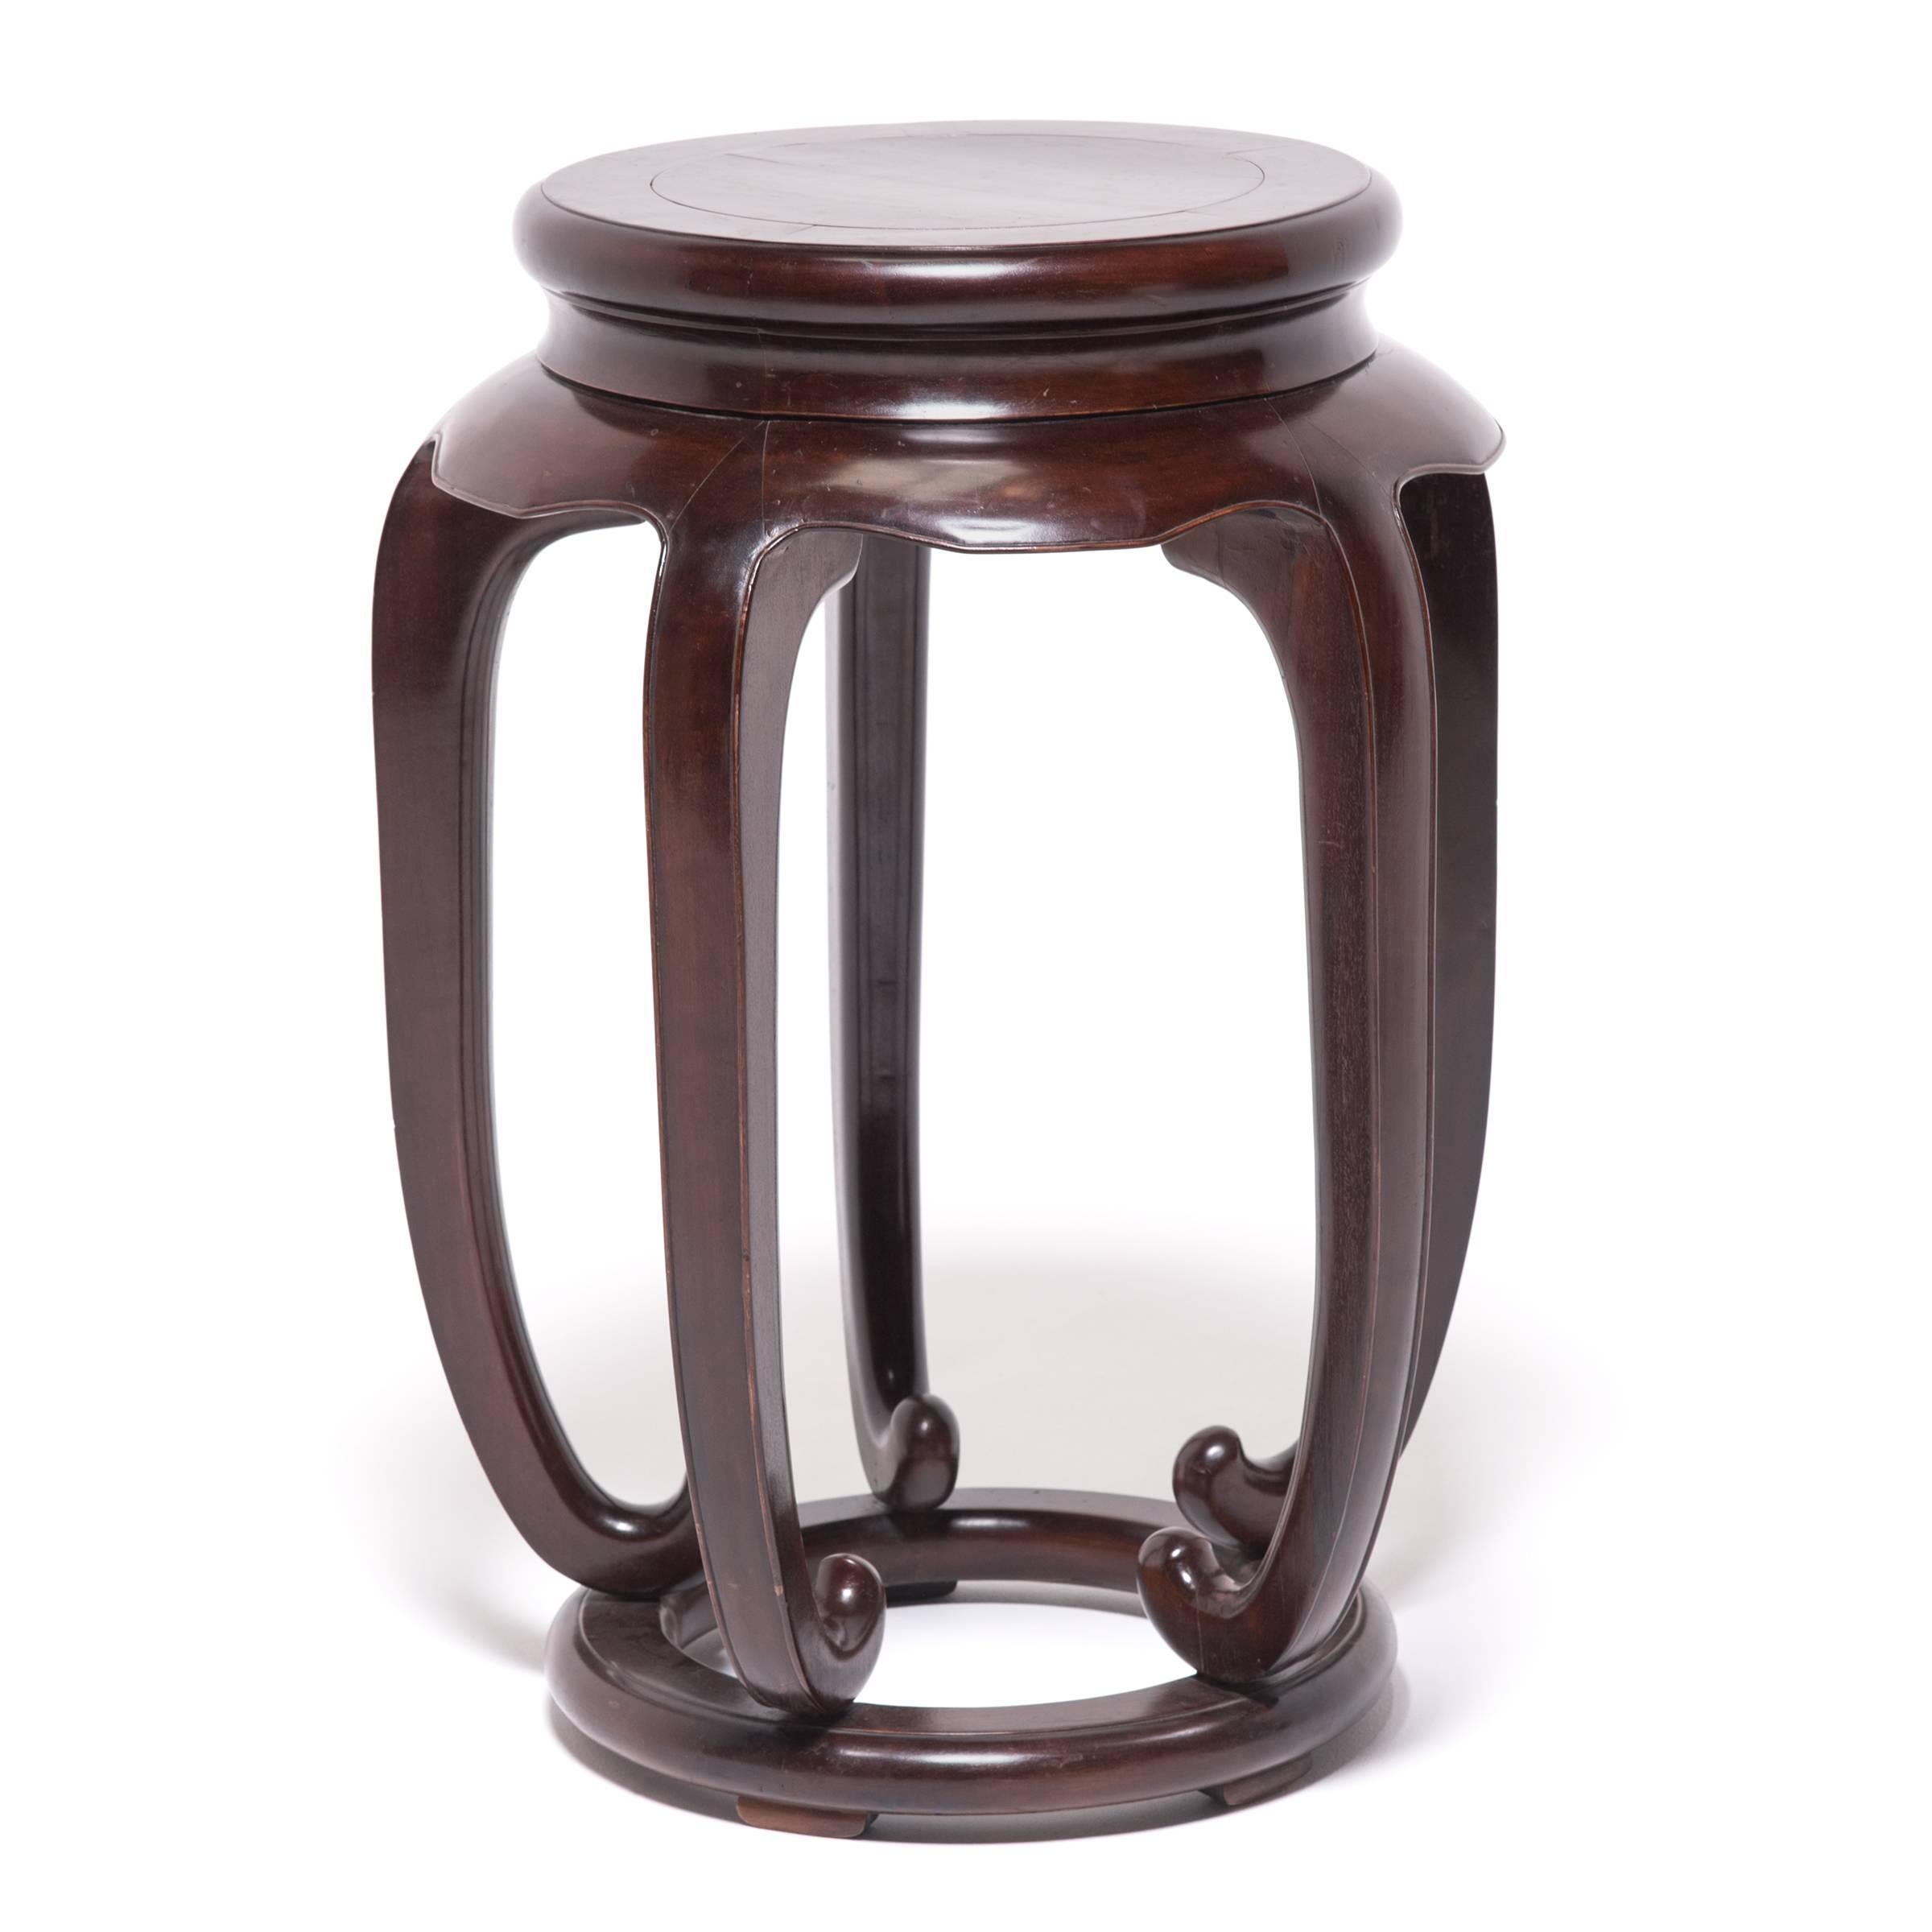 Rounded stands like this were frequently used in traditional Chinese culture as incense stands and are sometimes called meiping or vase stands because of their similarity in shape to a meiping jar. This jar was brilliantly built by hand with carved